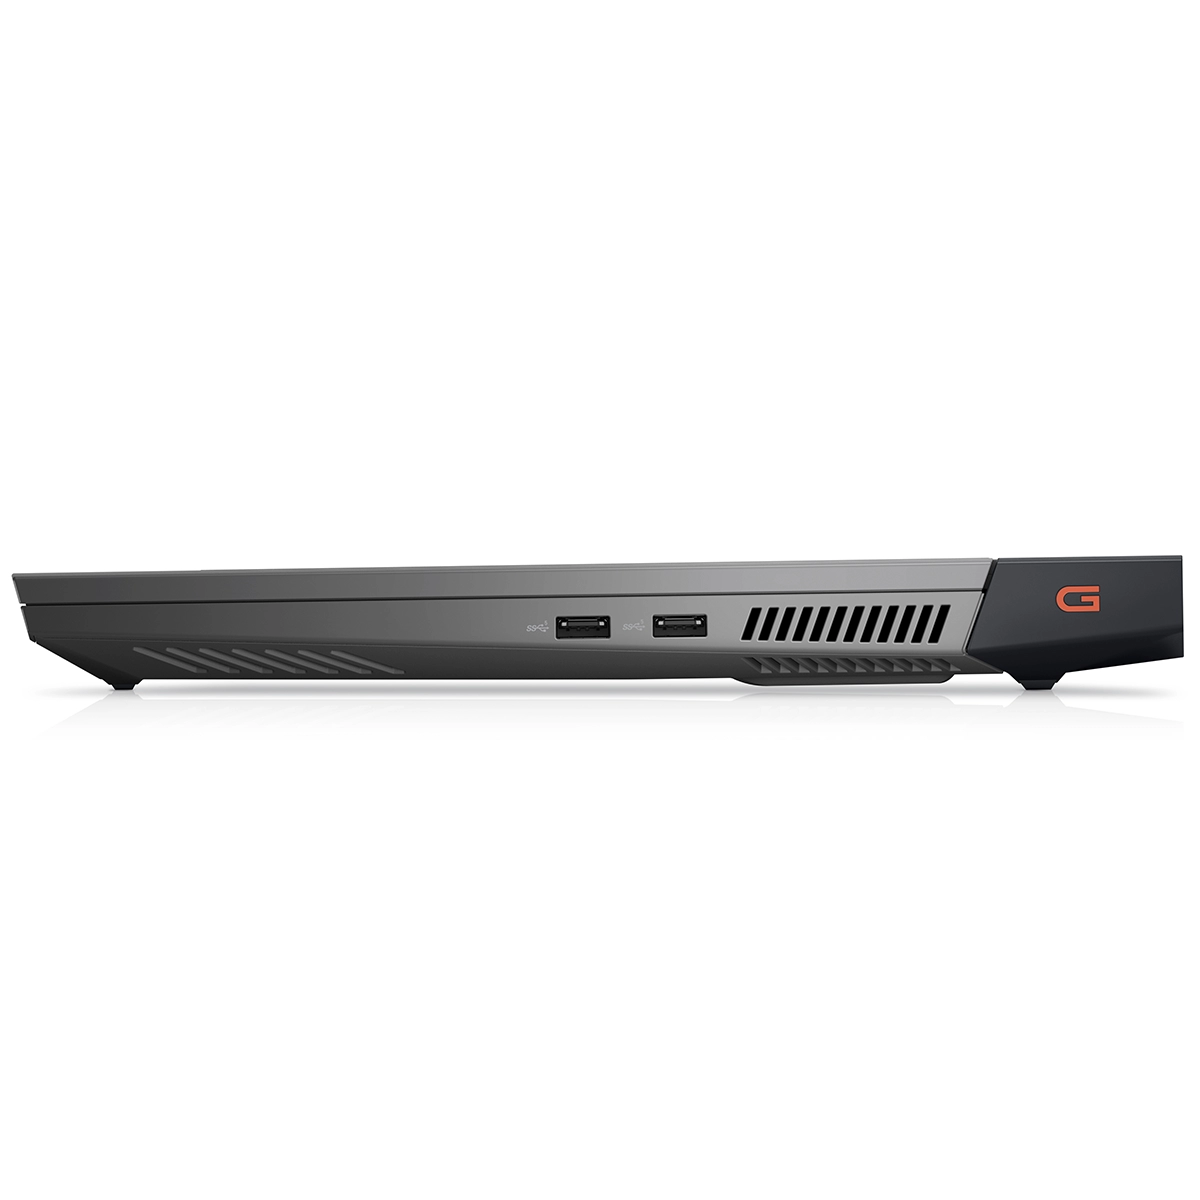 Dell G5 5511 Gaming Laptop